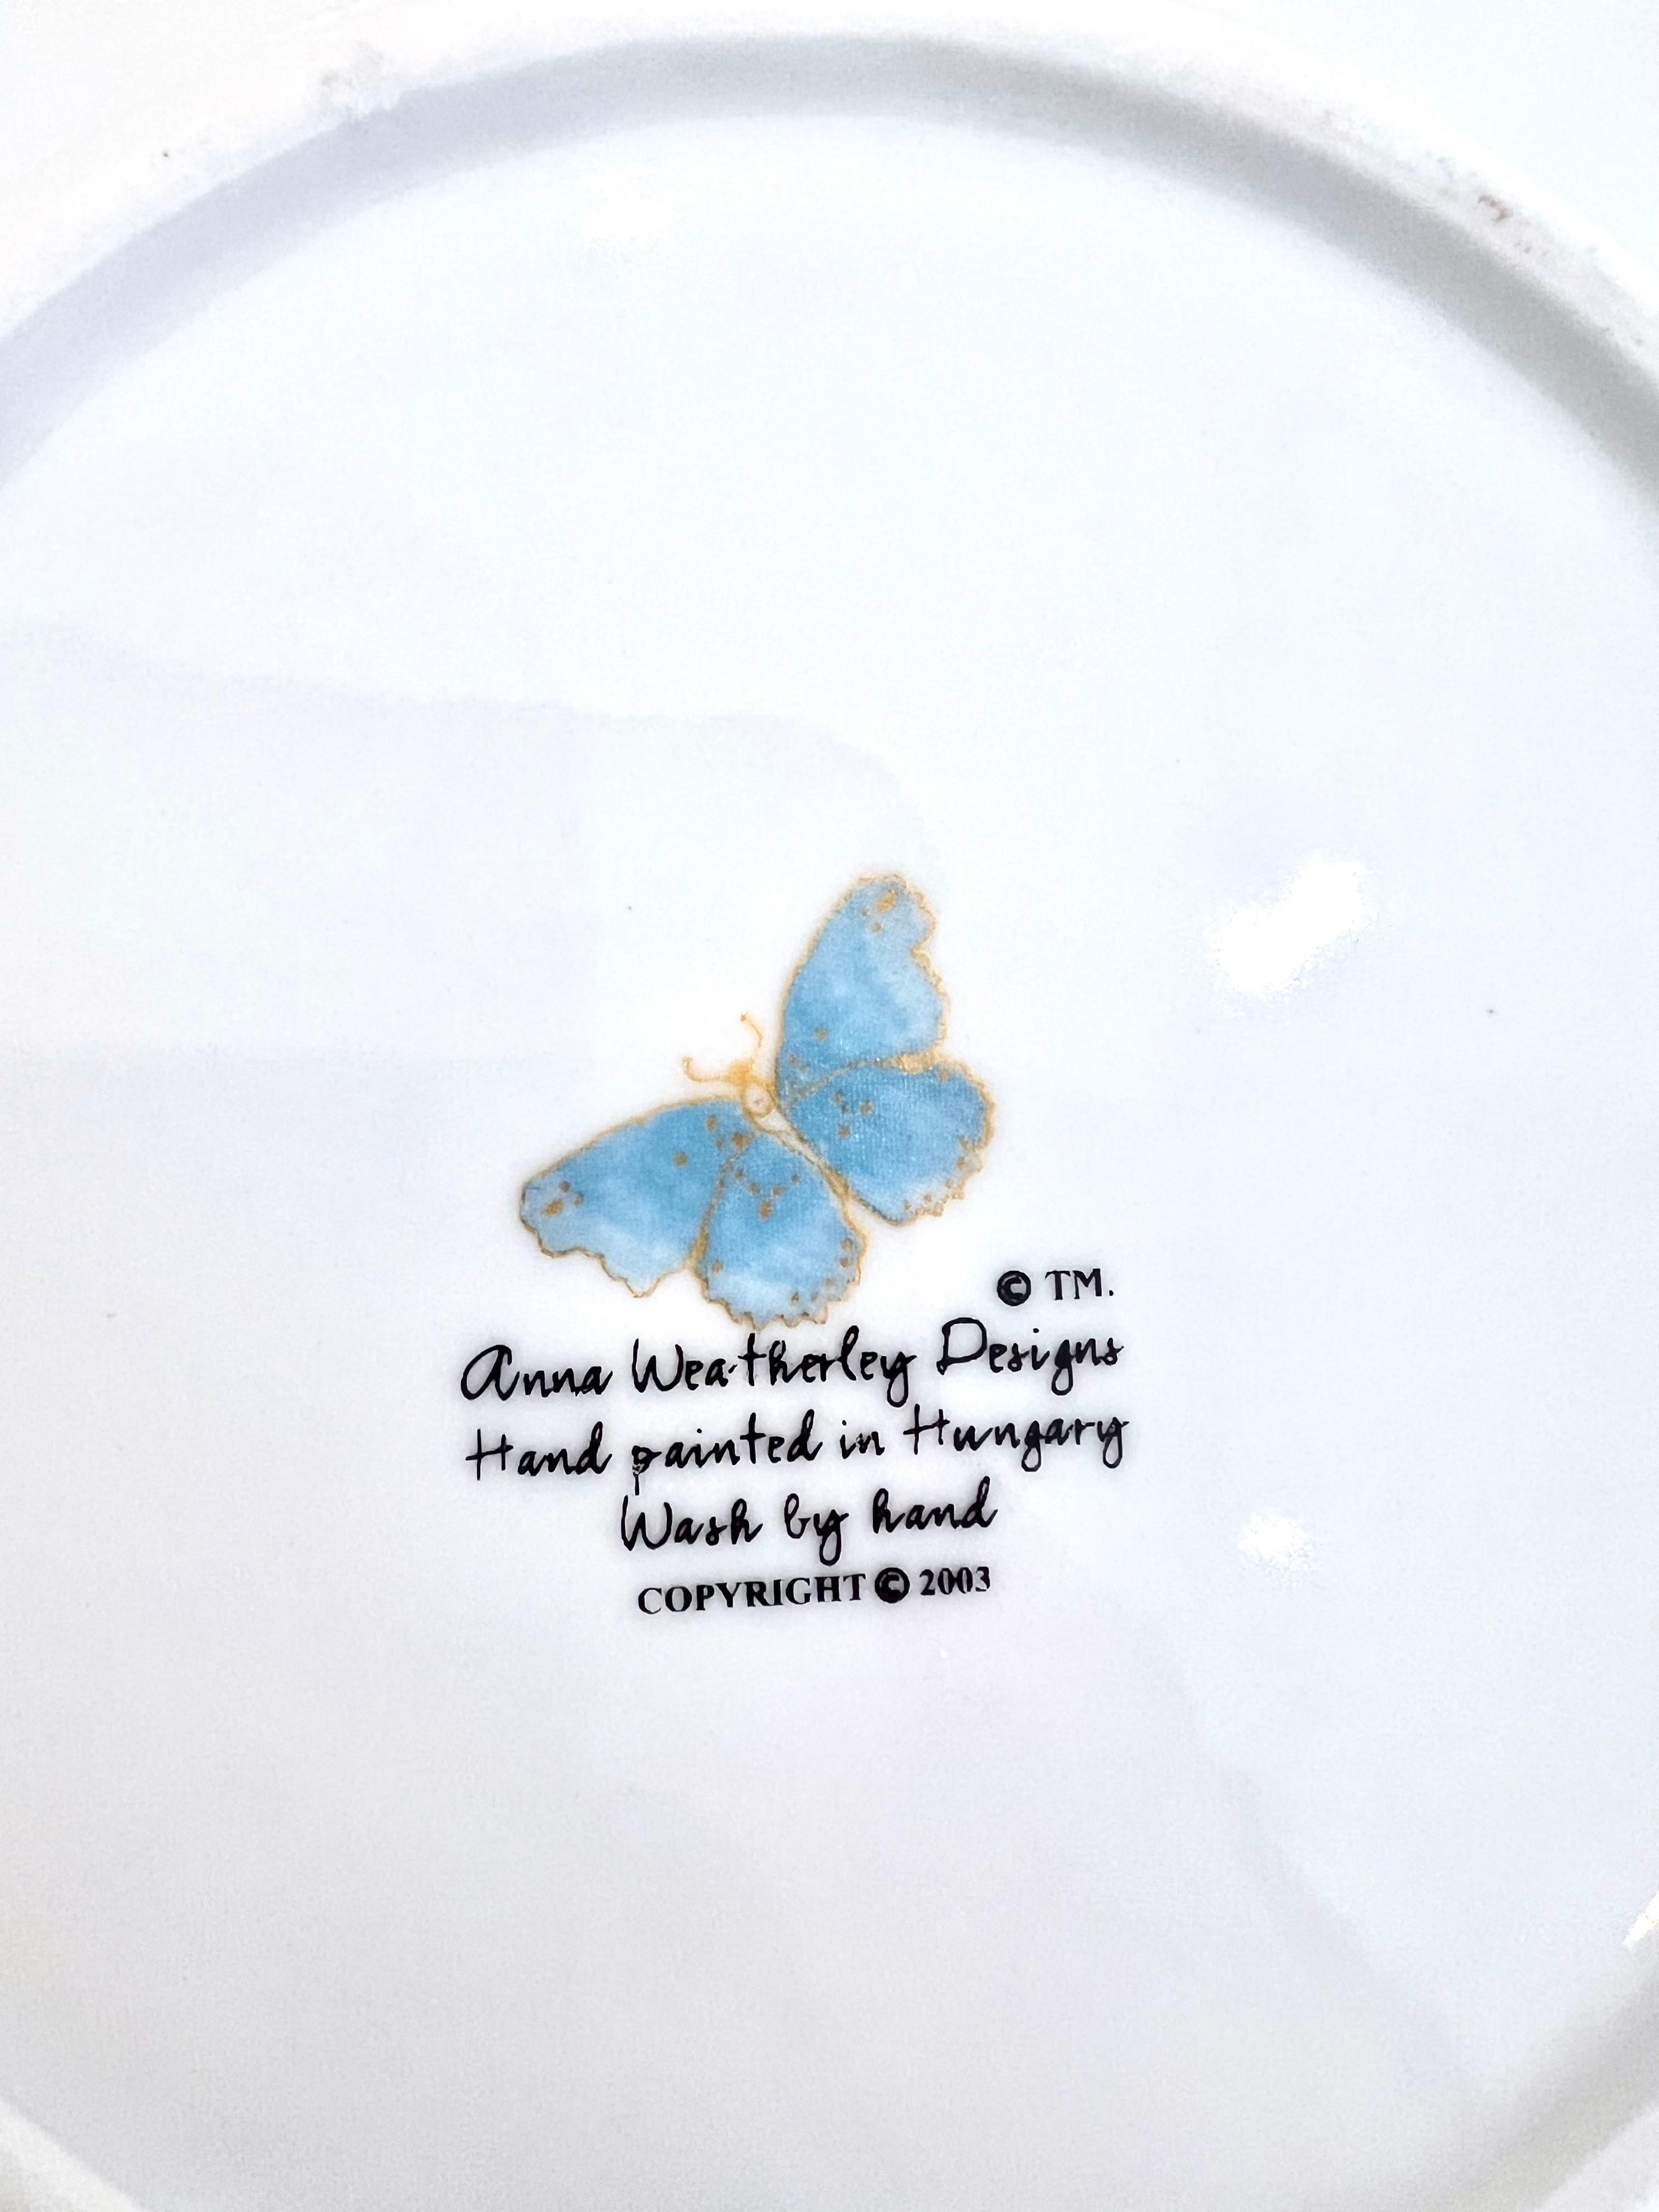 Contemporary Anna Weatherley - Hand Painted Porcelain Plates